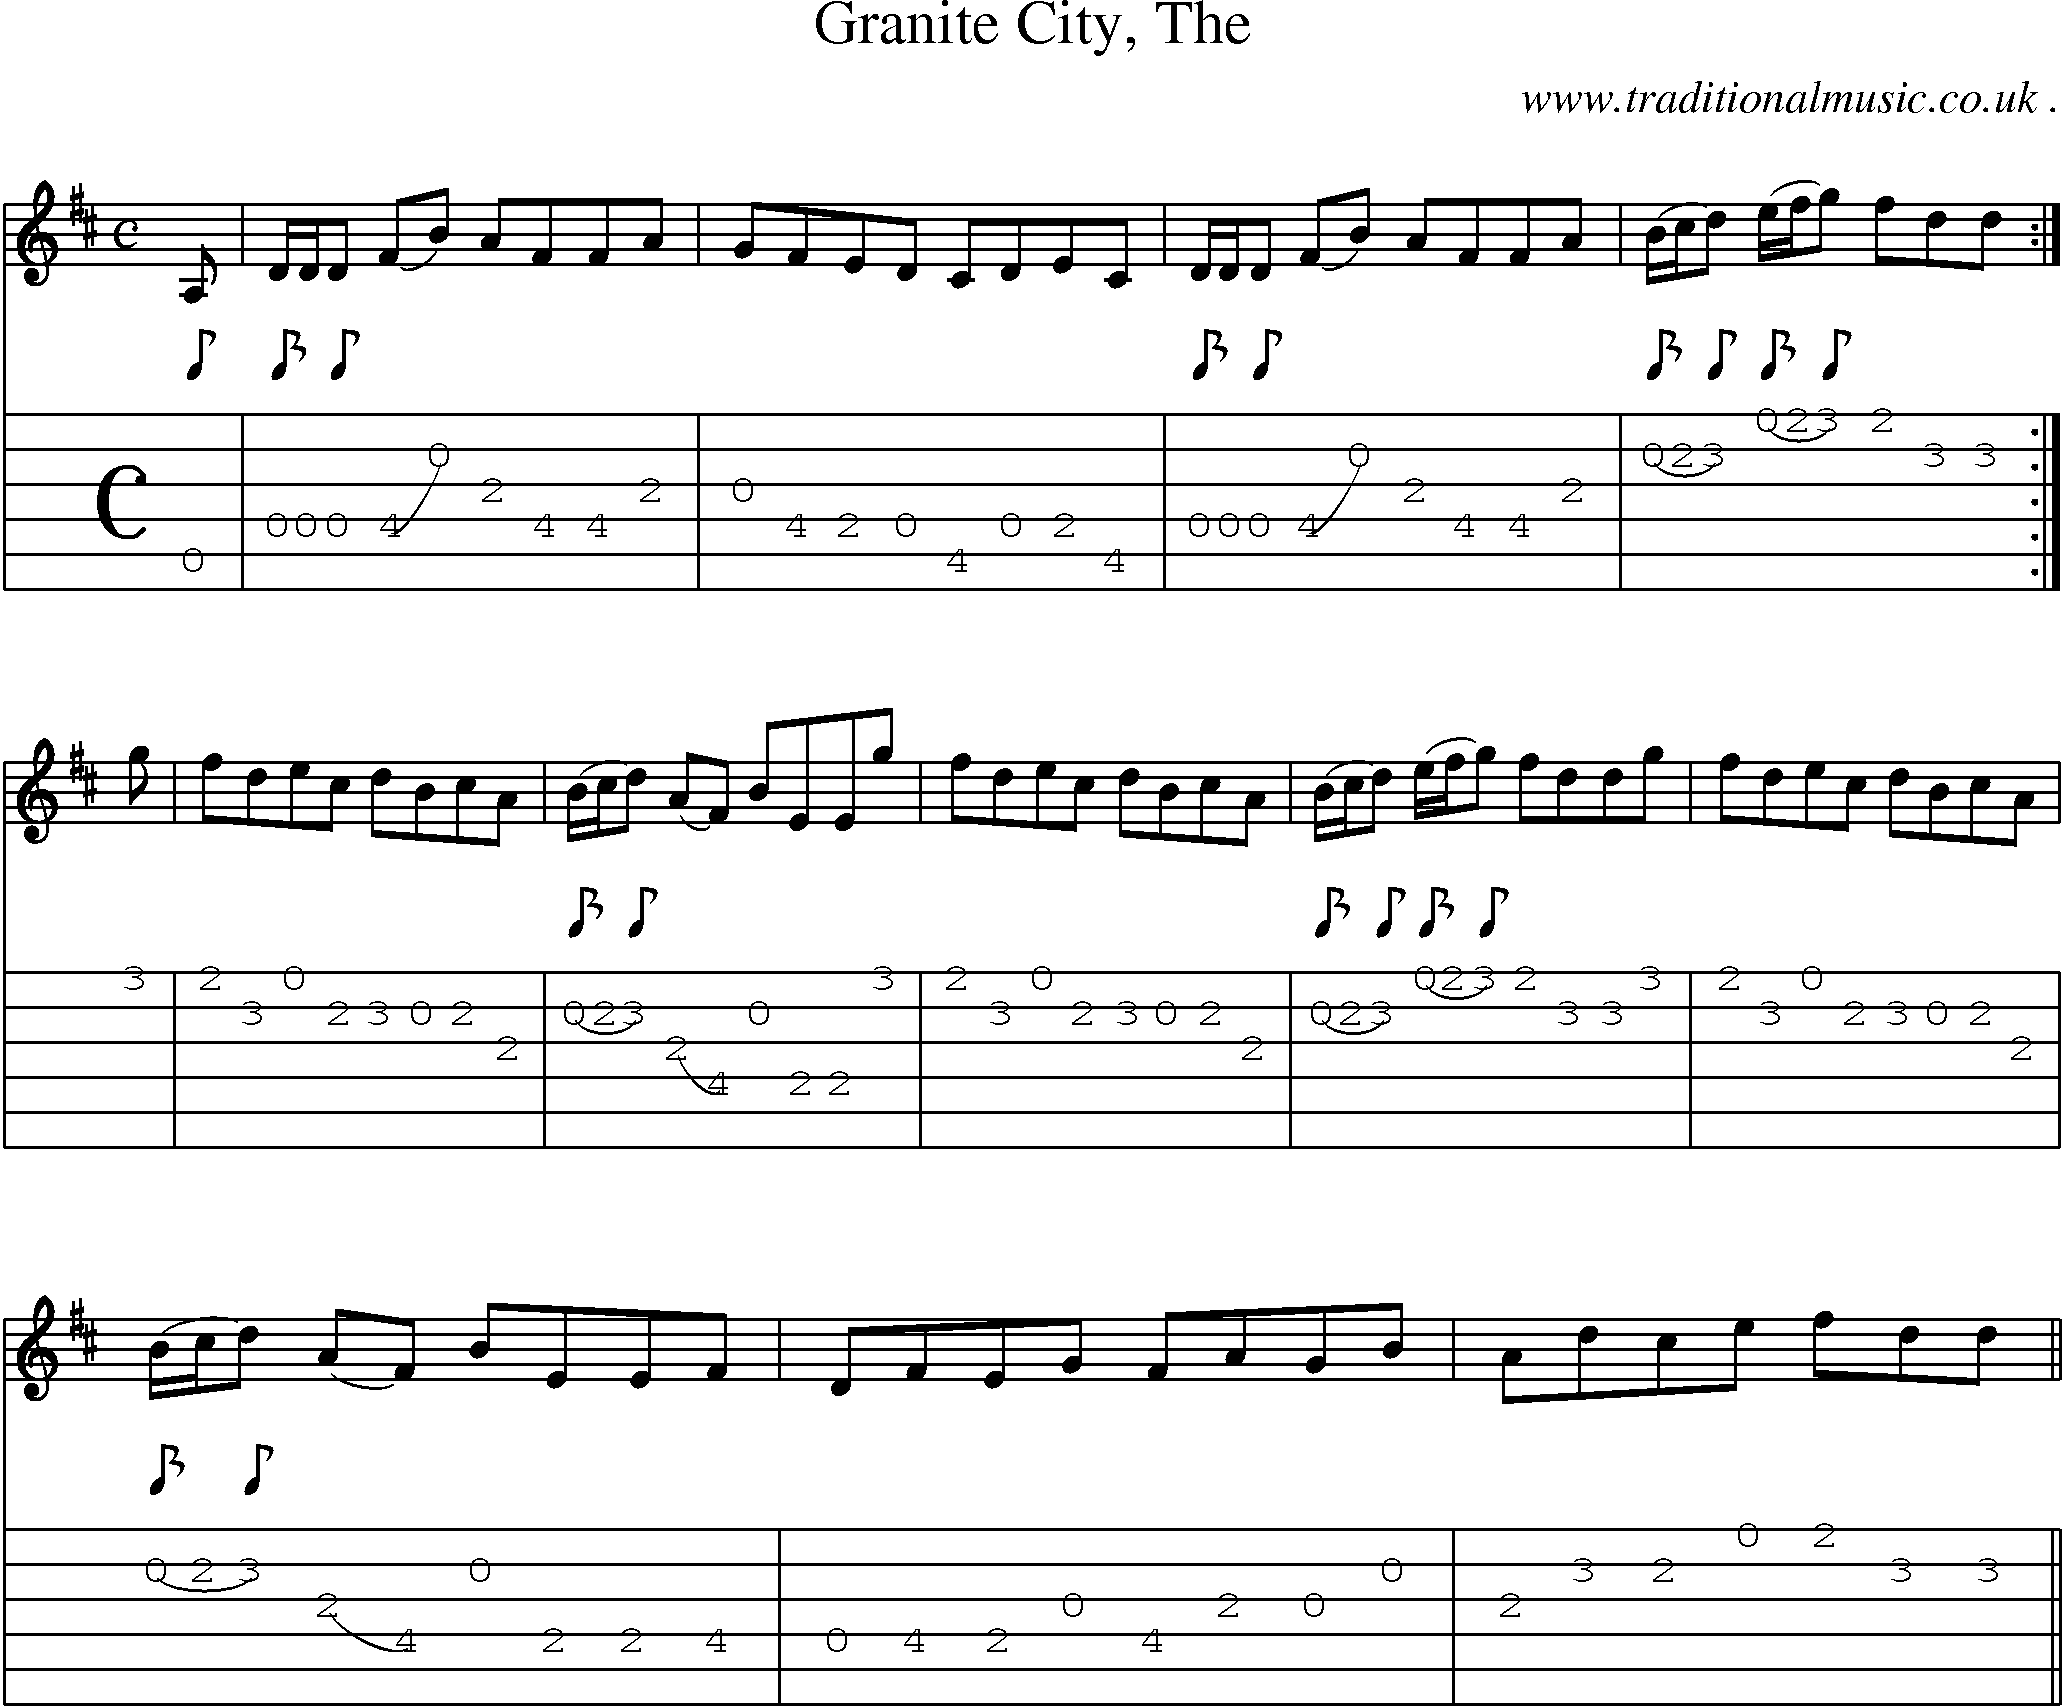 Sheet-music  score, Chords and Guitar Tabs for Granite City The